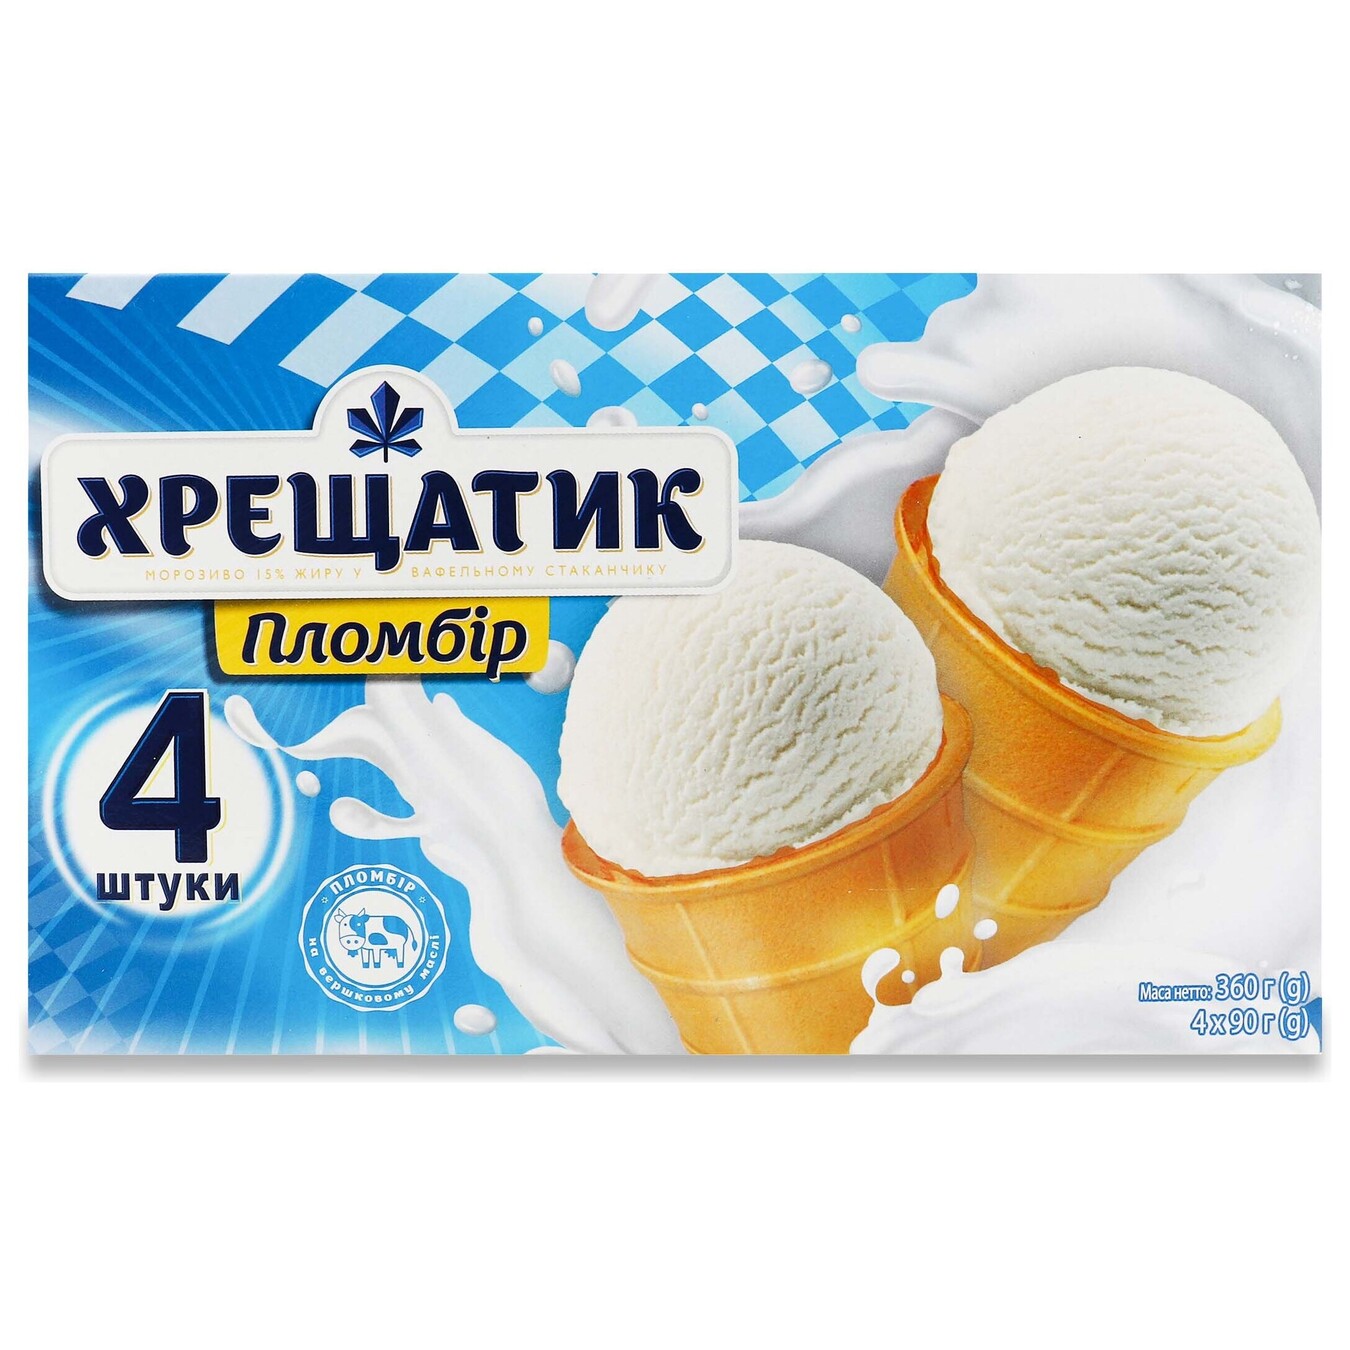 Khreshchatyk Ice cream filling 15% in a waffle cup, multipack 4x90g